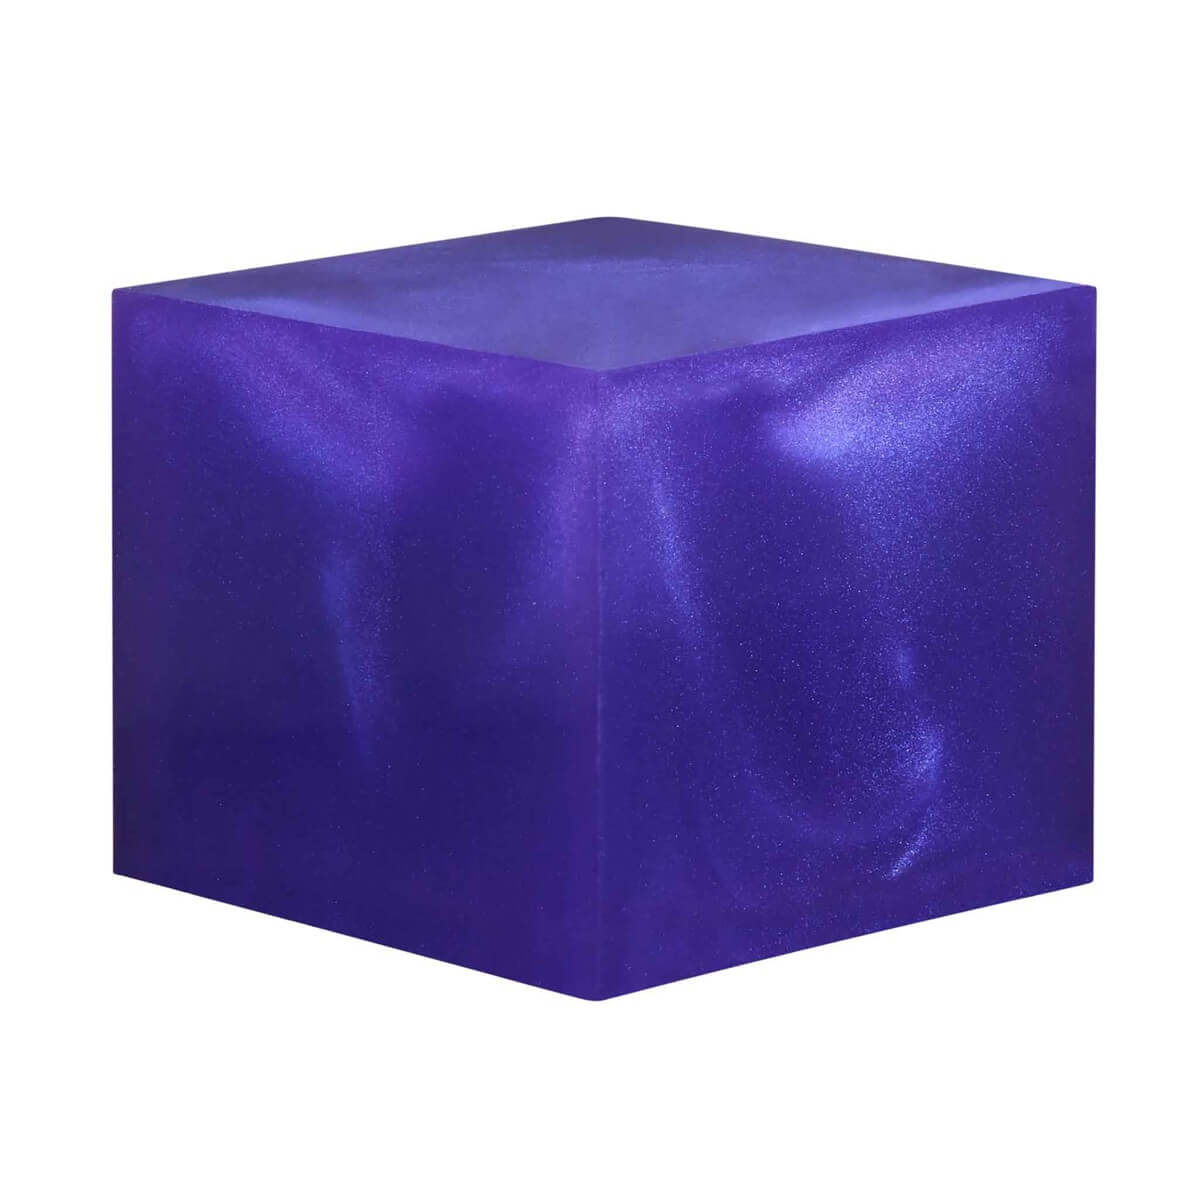 A resin cube made with the Violet Night Mica Powder Pigment by Pigmently.